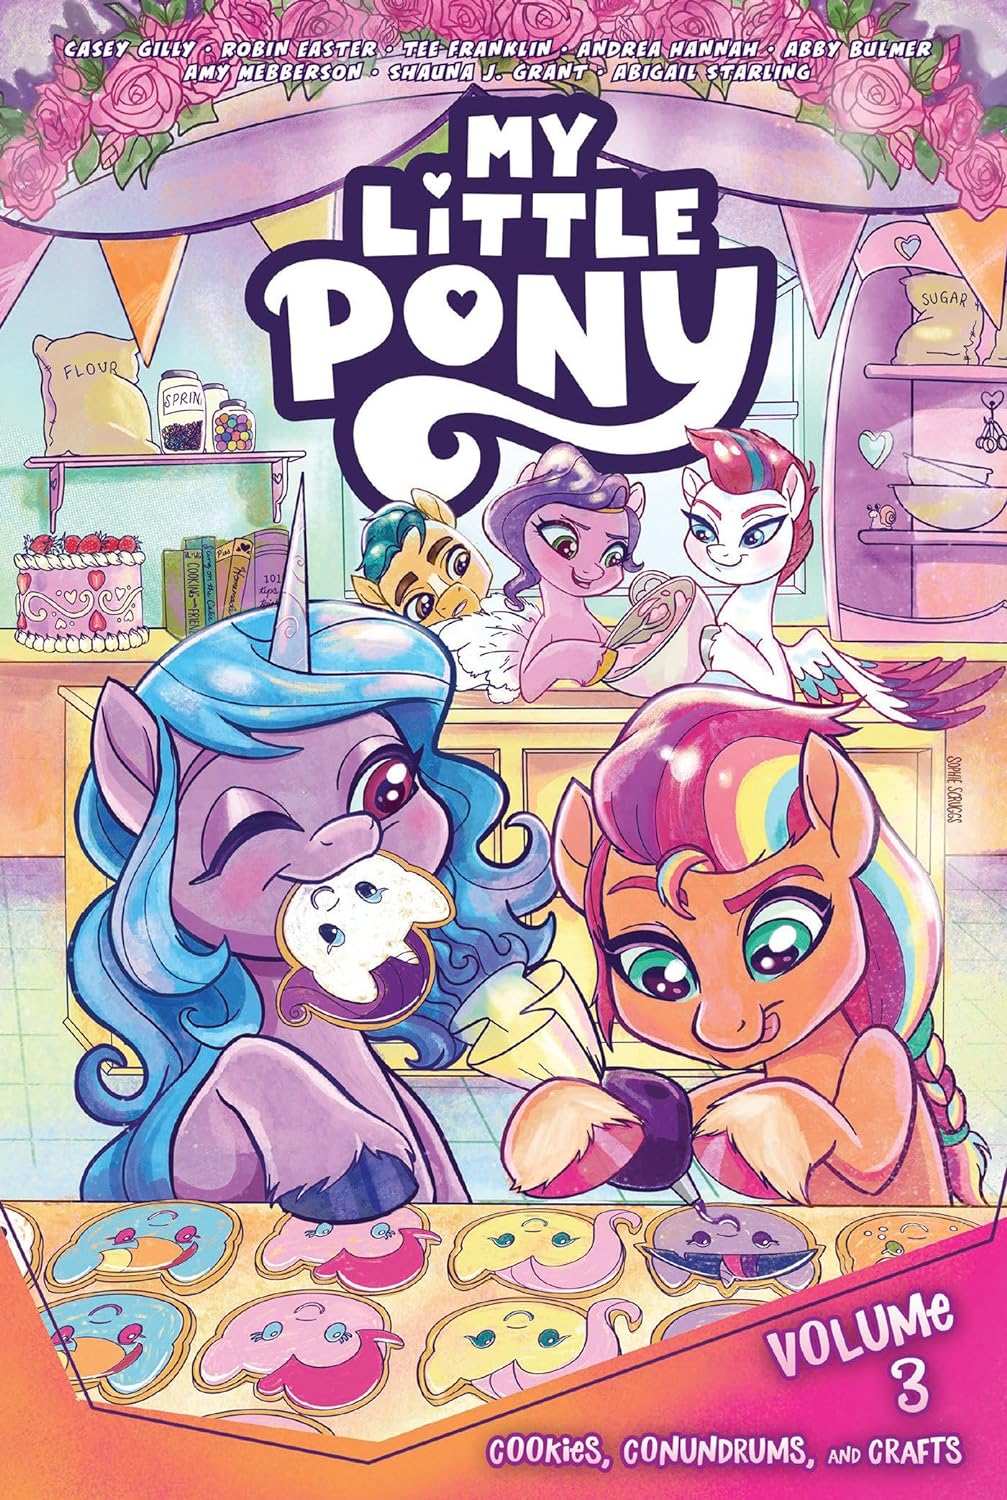 MLP: MYM Vol. 3: Cookies, Conundrums, and Crafts Comic Book